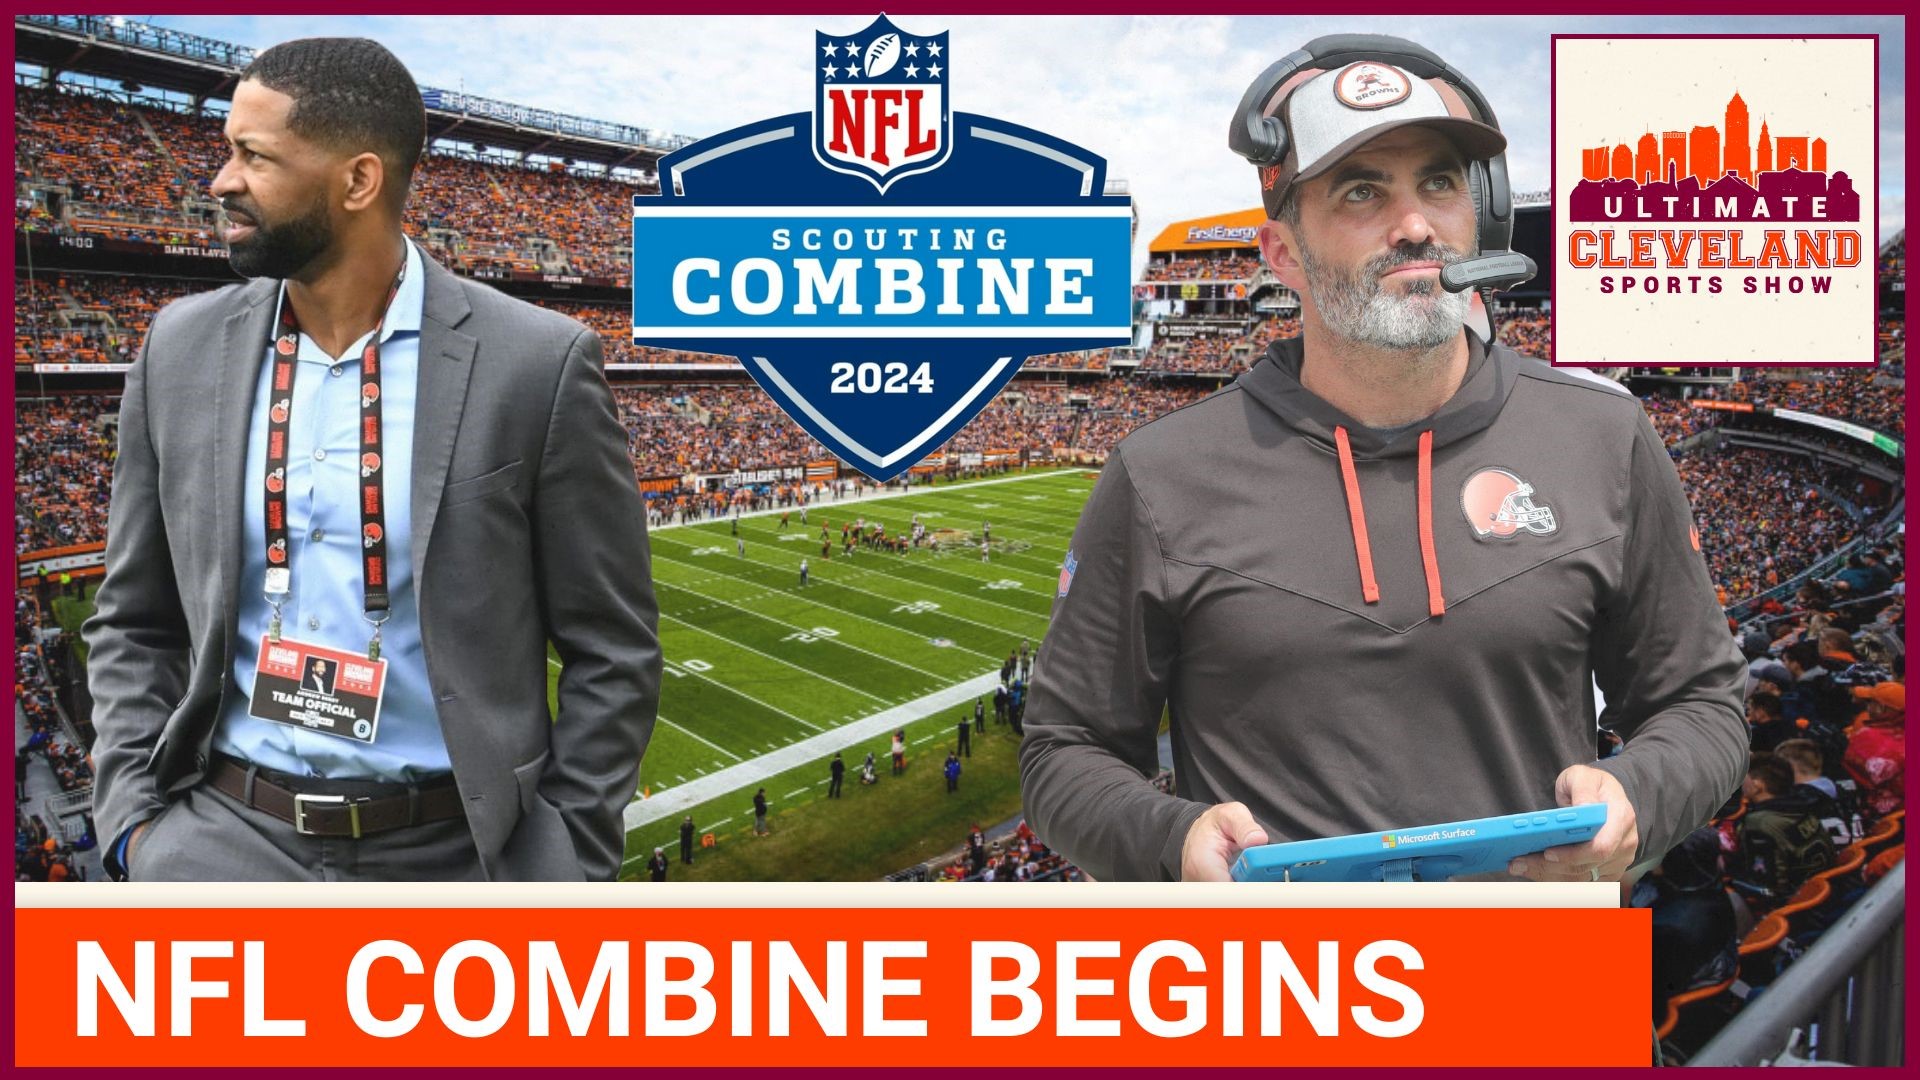 The NFL Combine starts this week, despite not having a 1st round pick, what and who should Cleveland Browns fans watch for?